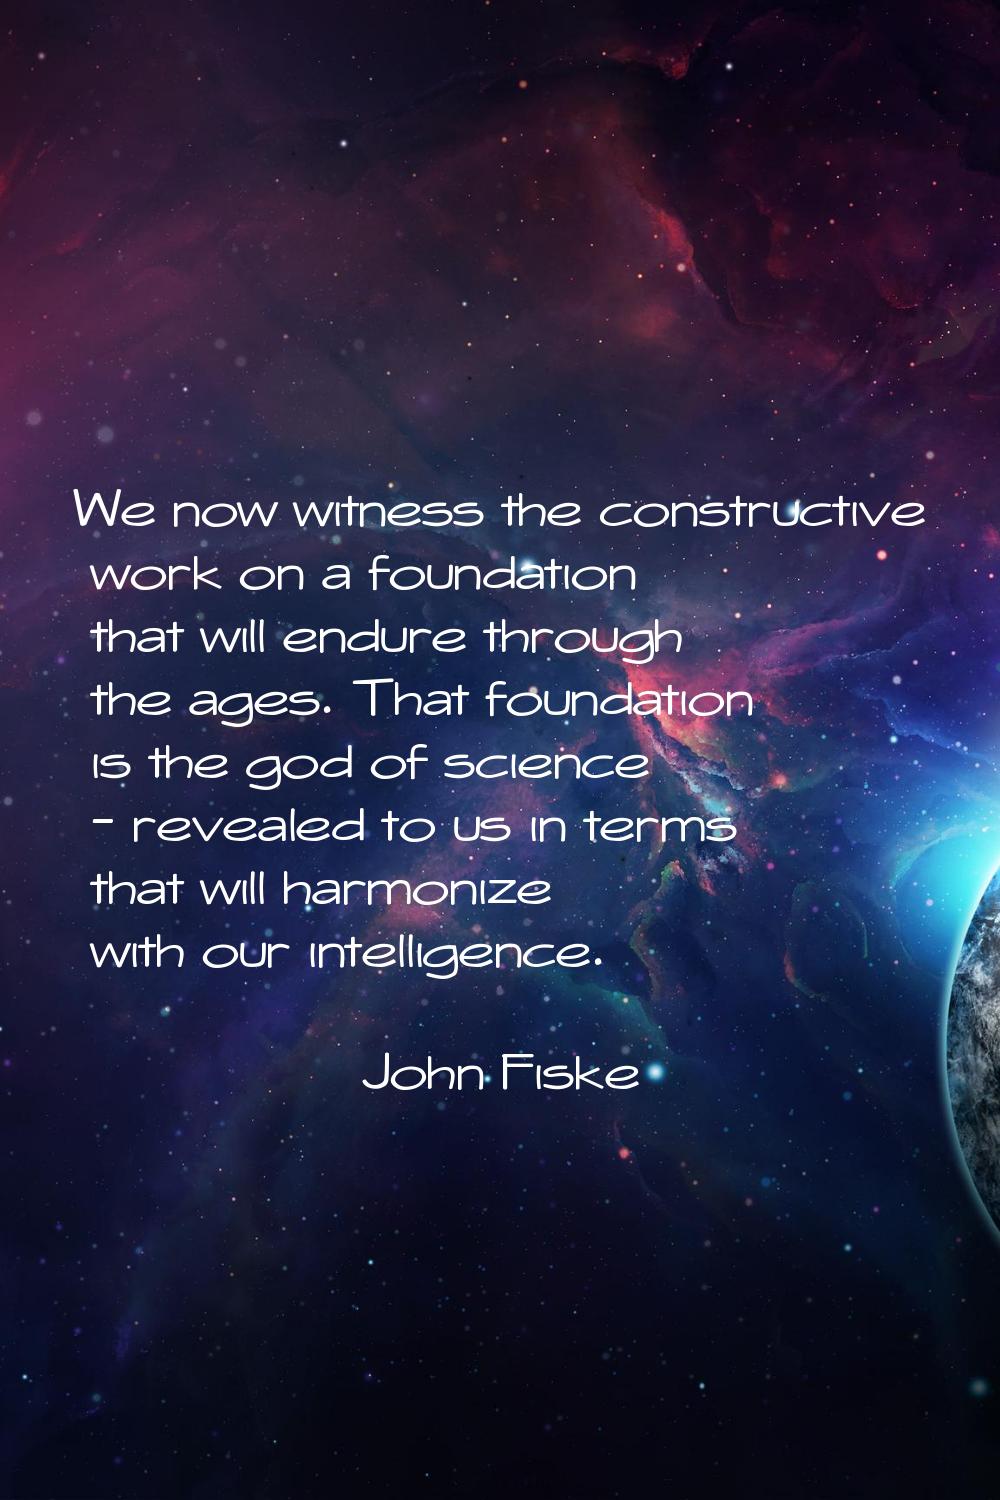 We now witness the constructive work on a foundation that will endure through the ages. That founda